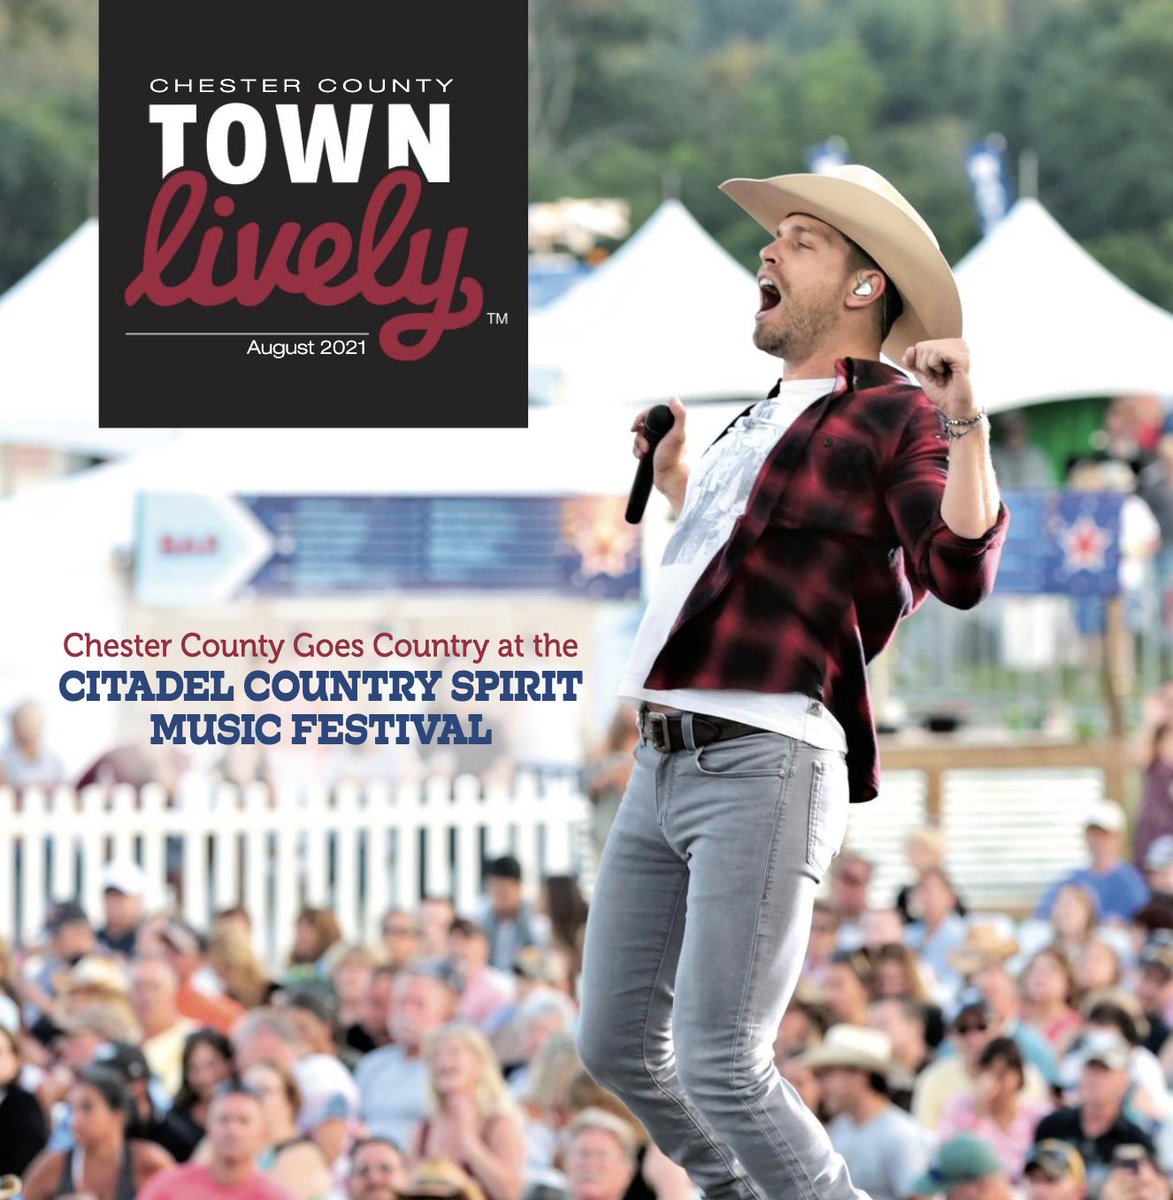 A great look at what's coming up at @CountrySpiritUS by TownLively.com! Come to the Ludwig's Corner August 27 -29 to see award winning country artists @mirandalambert , @brantleygilbert , Chris @ChrisYoungMusic & more! Read article: issuu.com/engleprintin..…